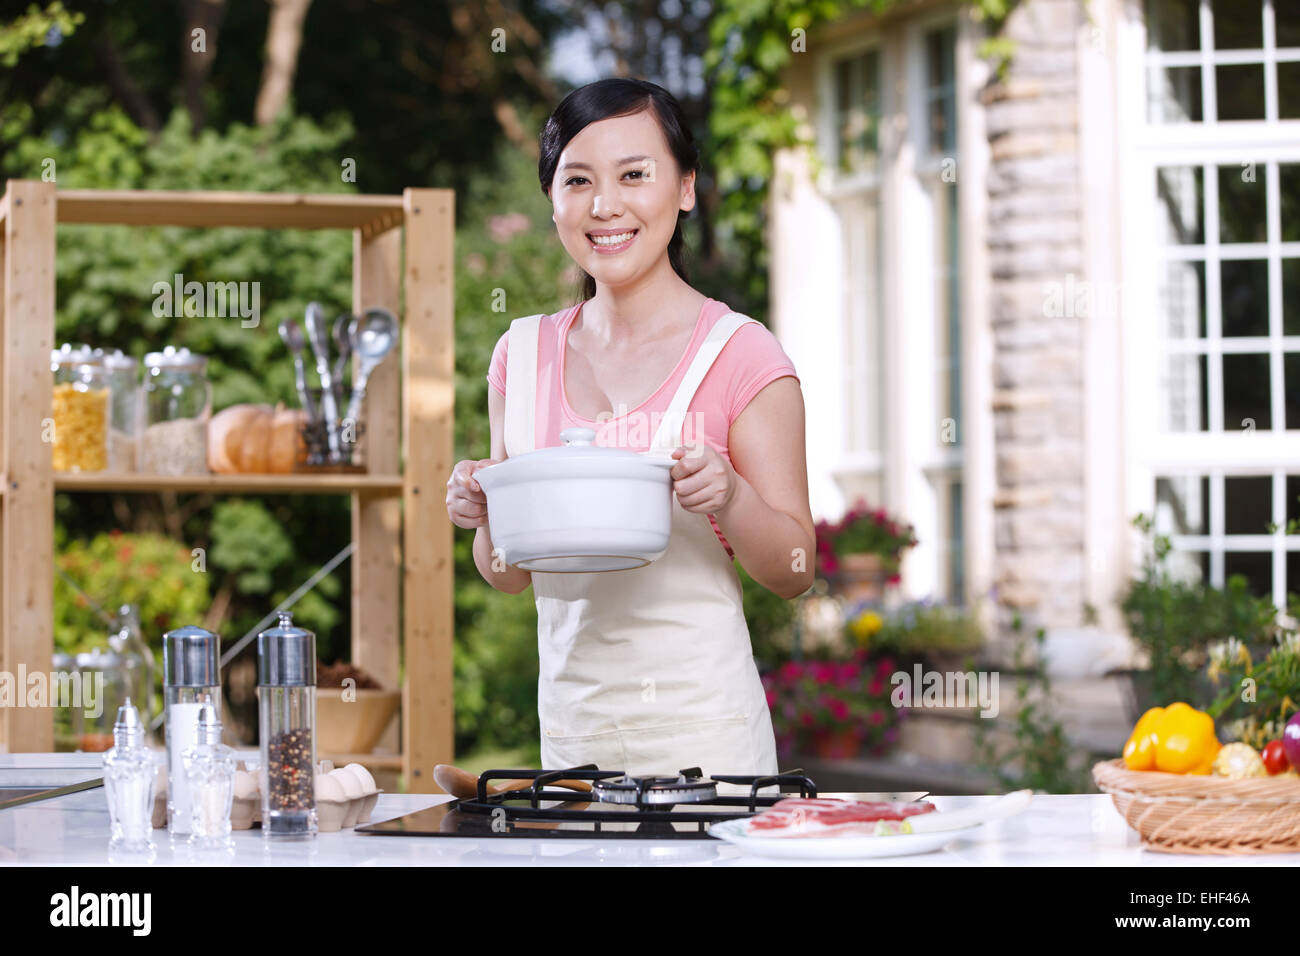 Oriental woman cooking in the outdoor kitchen Stock Photo